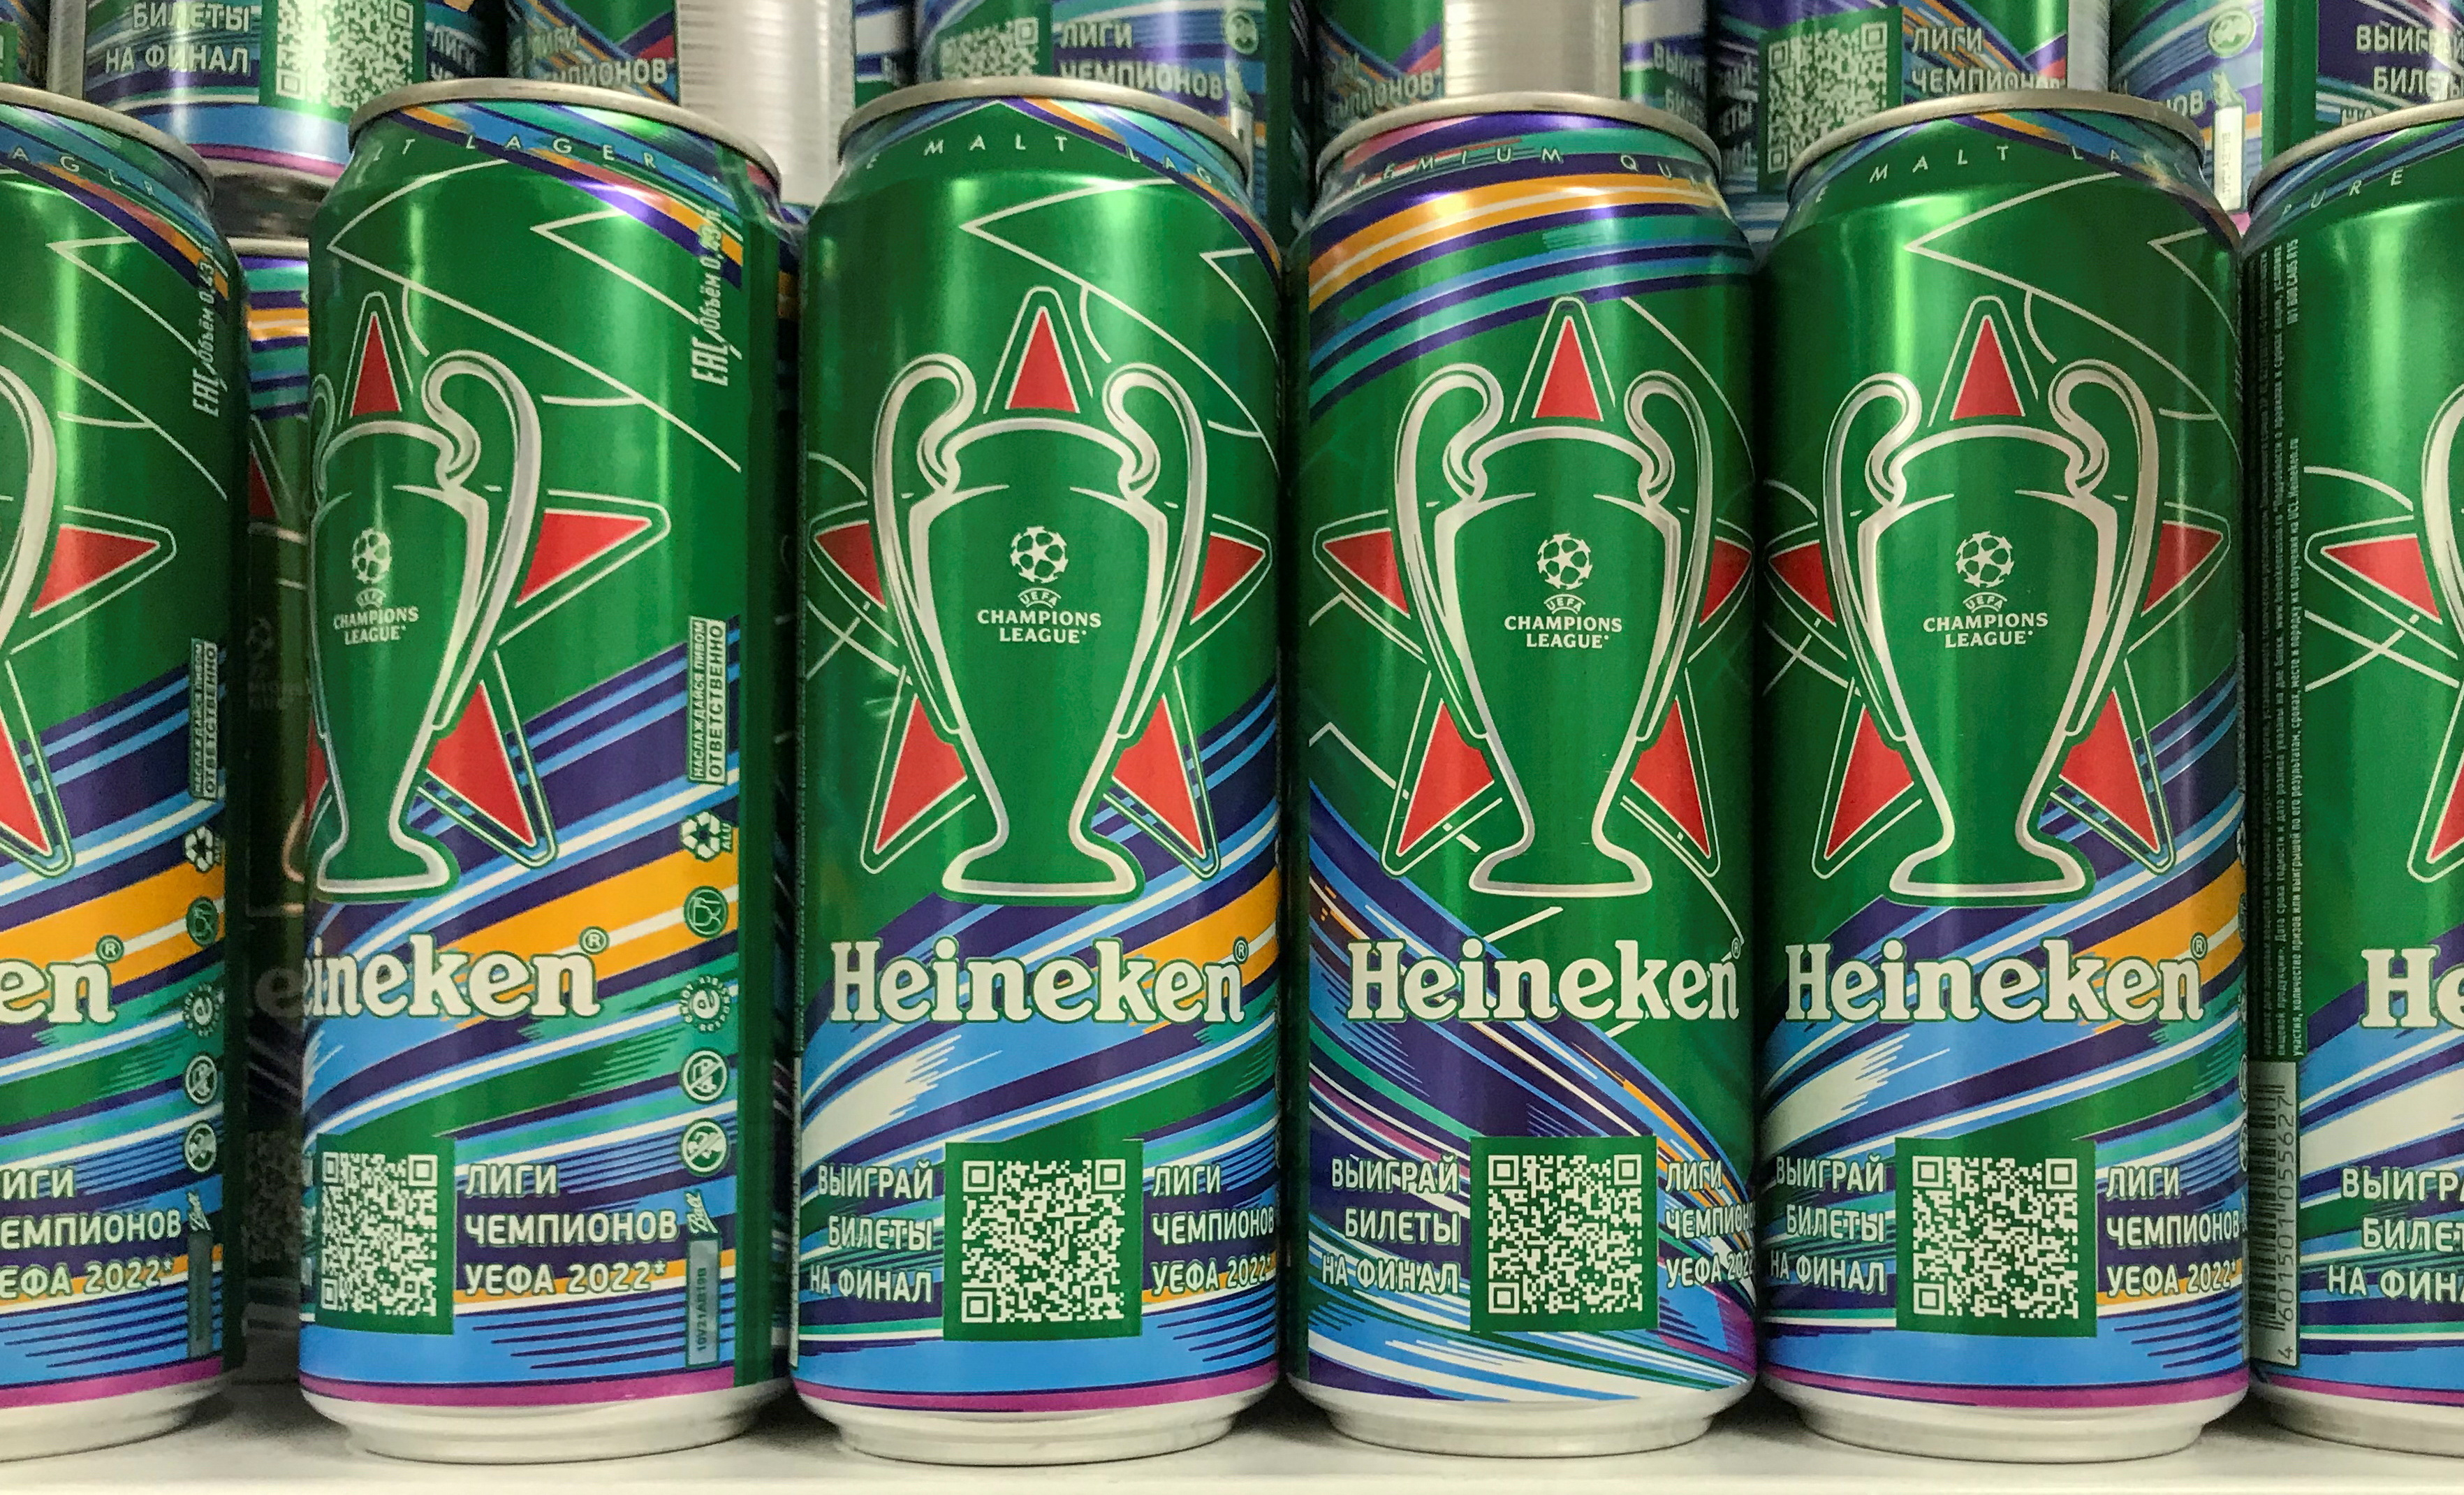 Cans of Heineken beer are displayed at a shop in Moscow